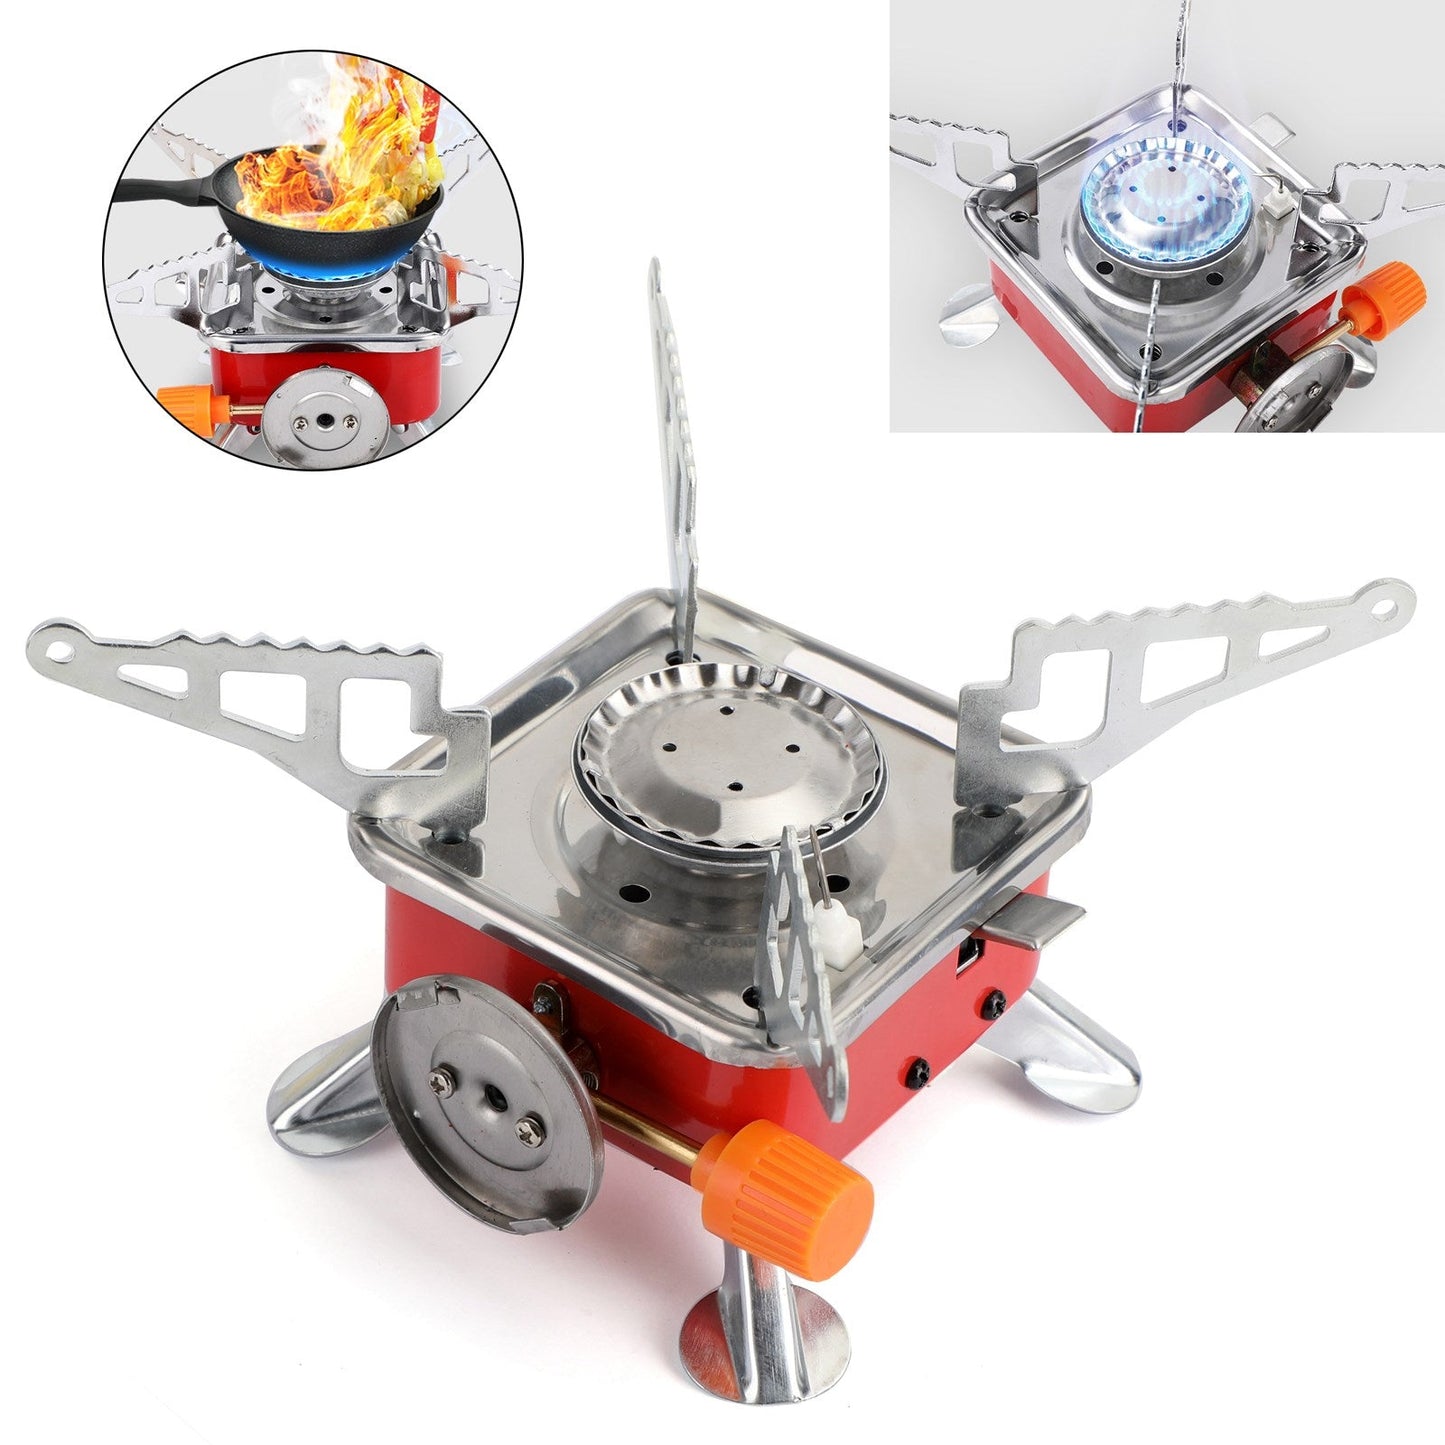 Outdoor Portable Cooking Stove Butane Gas BBQ Hiking Camping Fishing Coffee